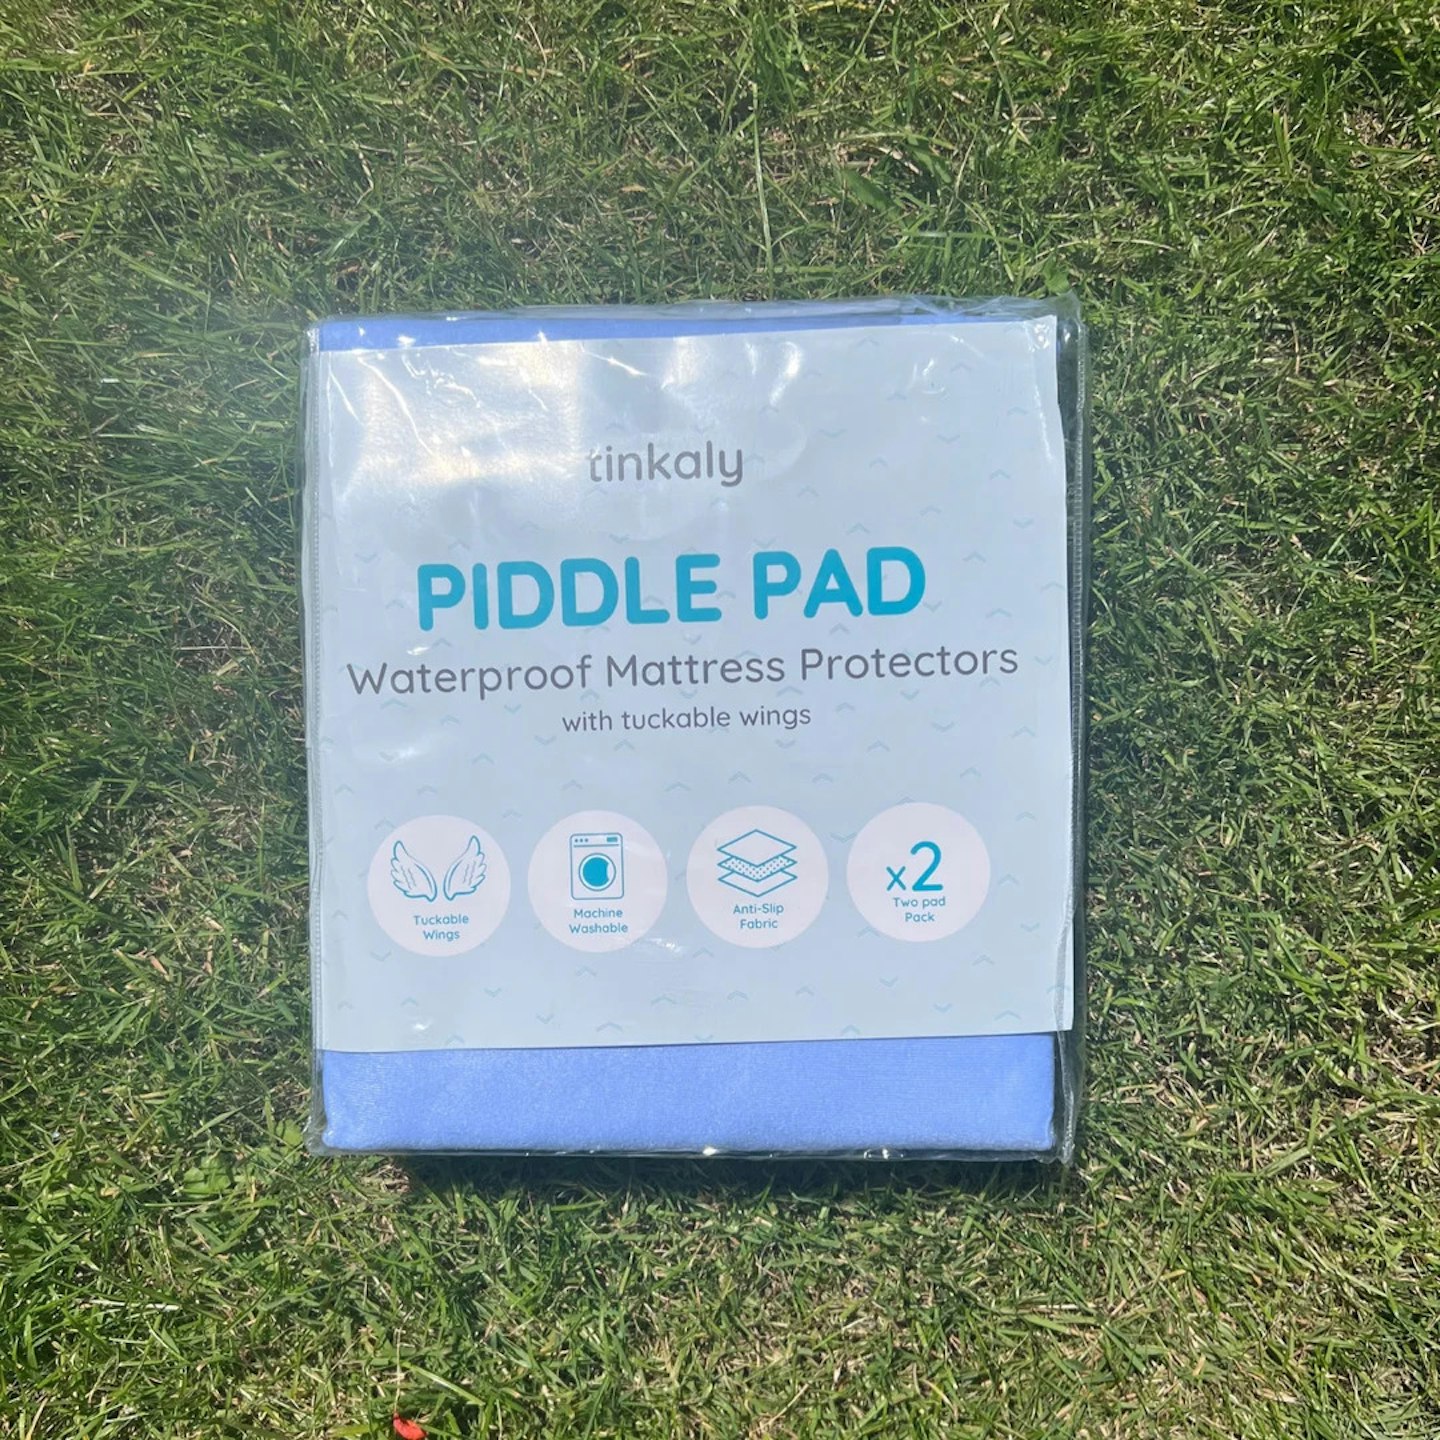 Tinkaly Piddle Pads